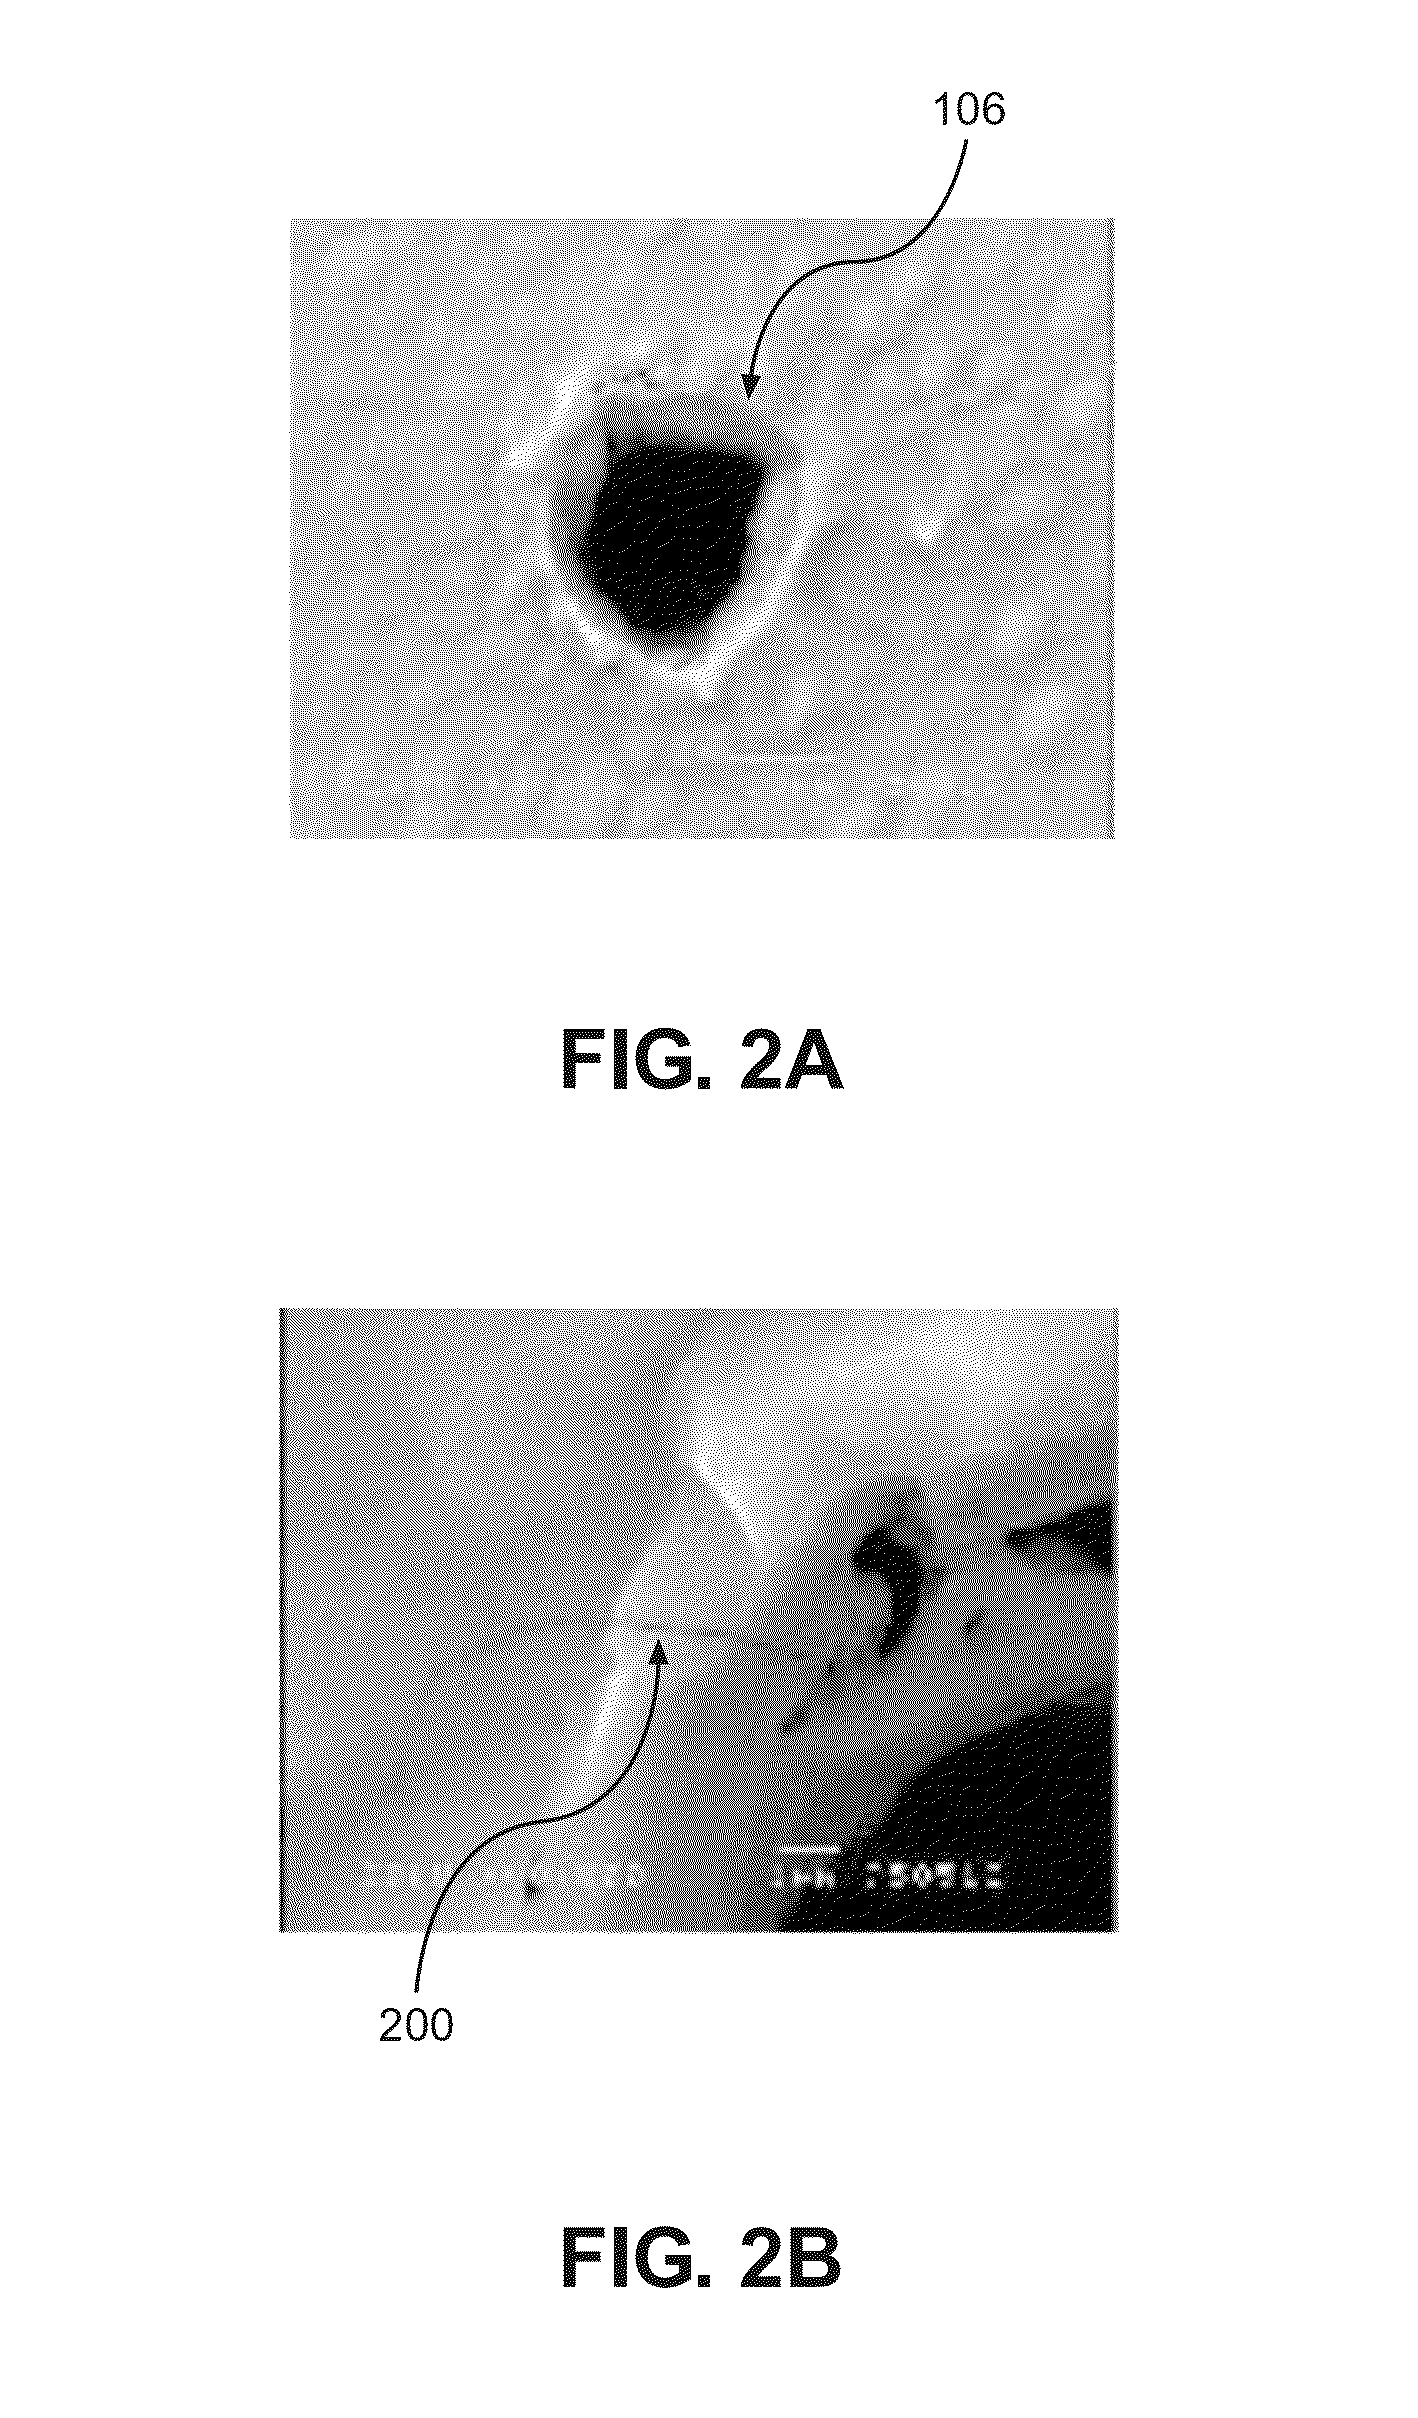 THROUGH-SILICON VIA (TSV) CRACK SENSORS FOR DETECTING TSV CRACKS IN THREE-DIMENSIONAL (3D) INTEGRATED CIRCUITS (ICs) (3DICs), AND RELATED METHODS AND SYSTEMS